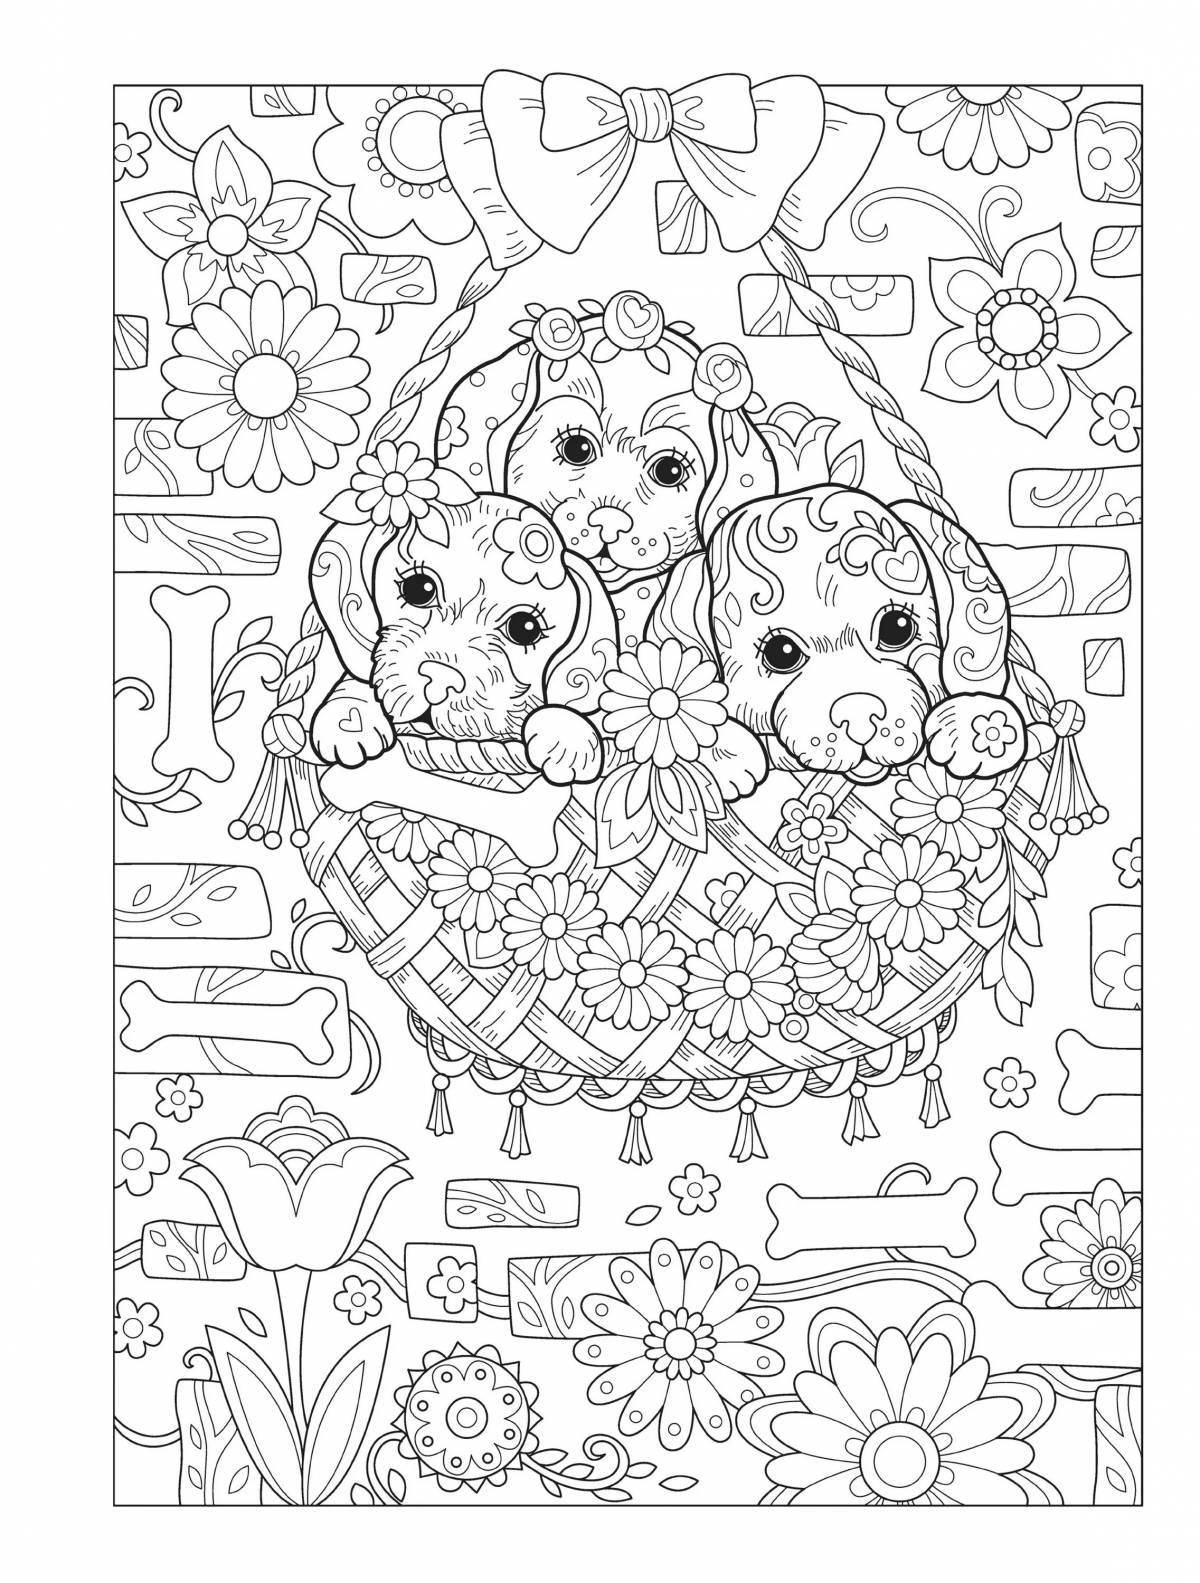 Bright anti-stress coloring book for girls 10-12 years old